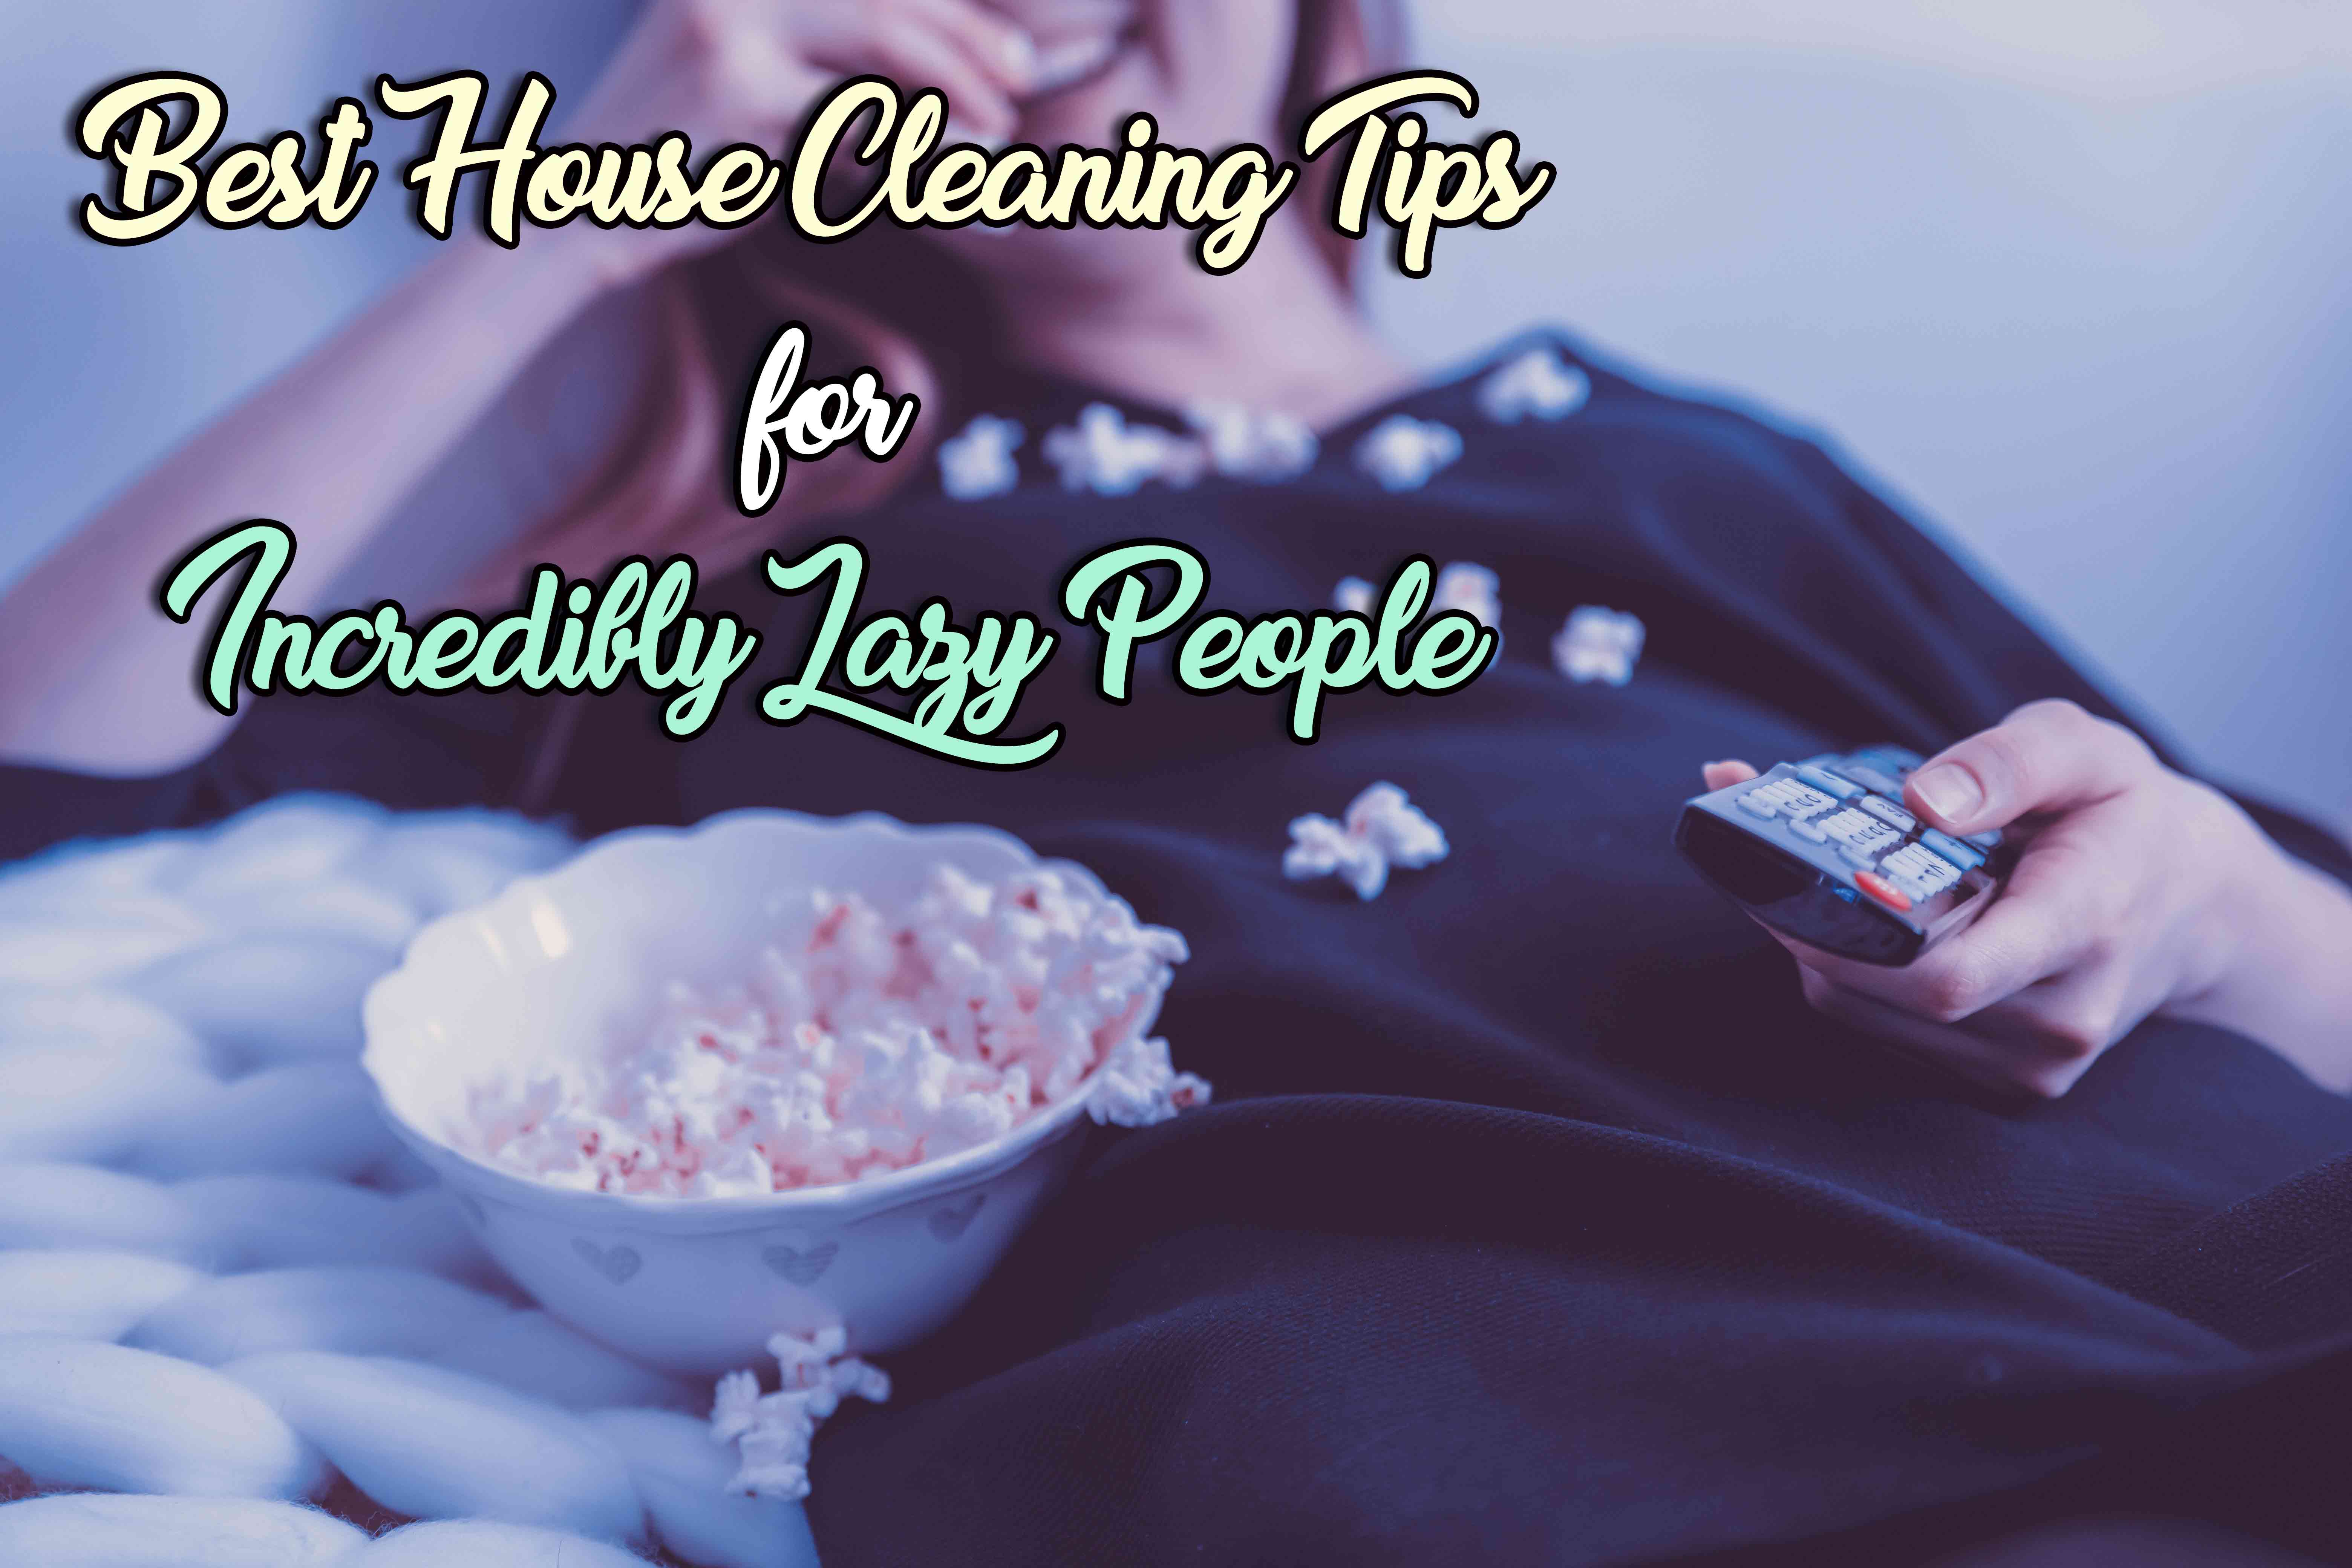 Best House Cleaning Tips for Incredibly Lazy People